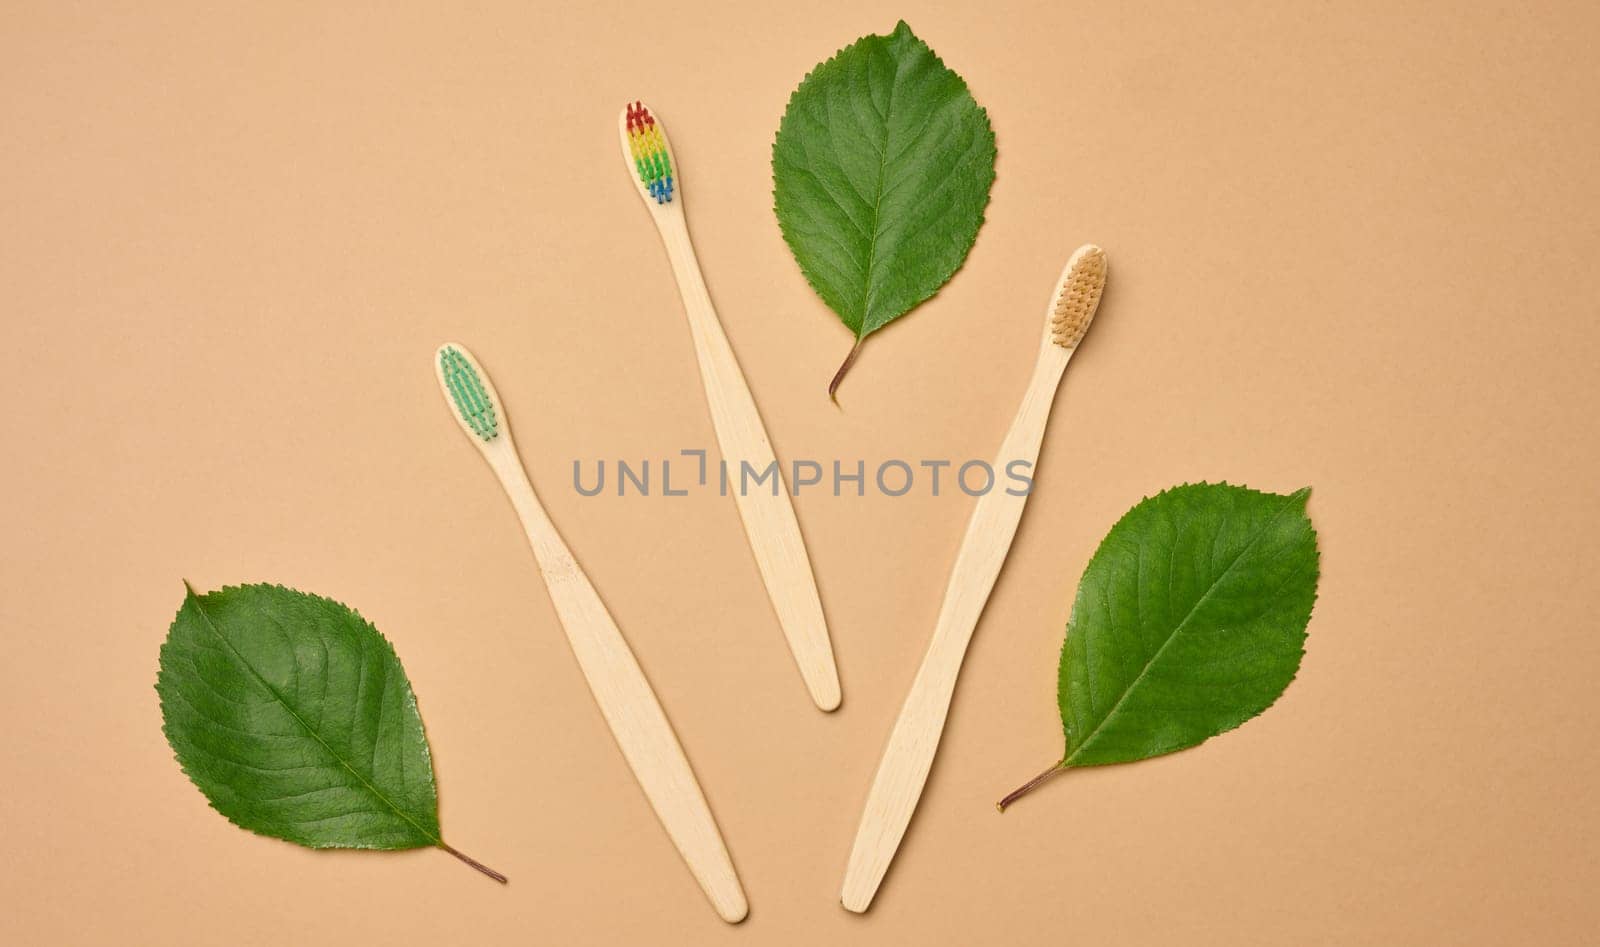 Wooden toothbrush on a brown background, plastic rejection concept, zero waste by ndanko